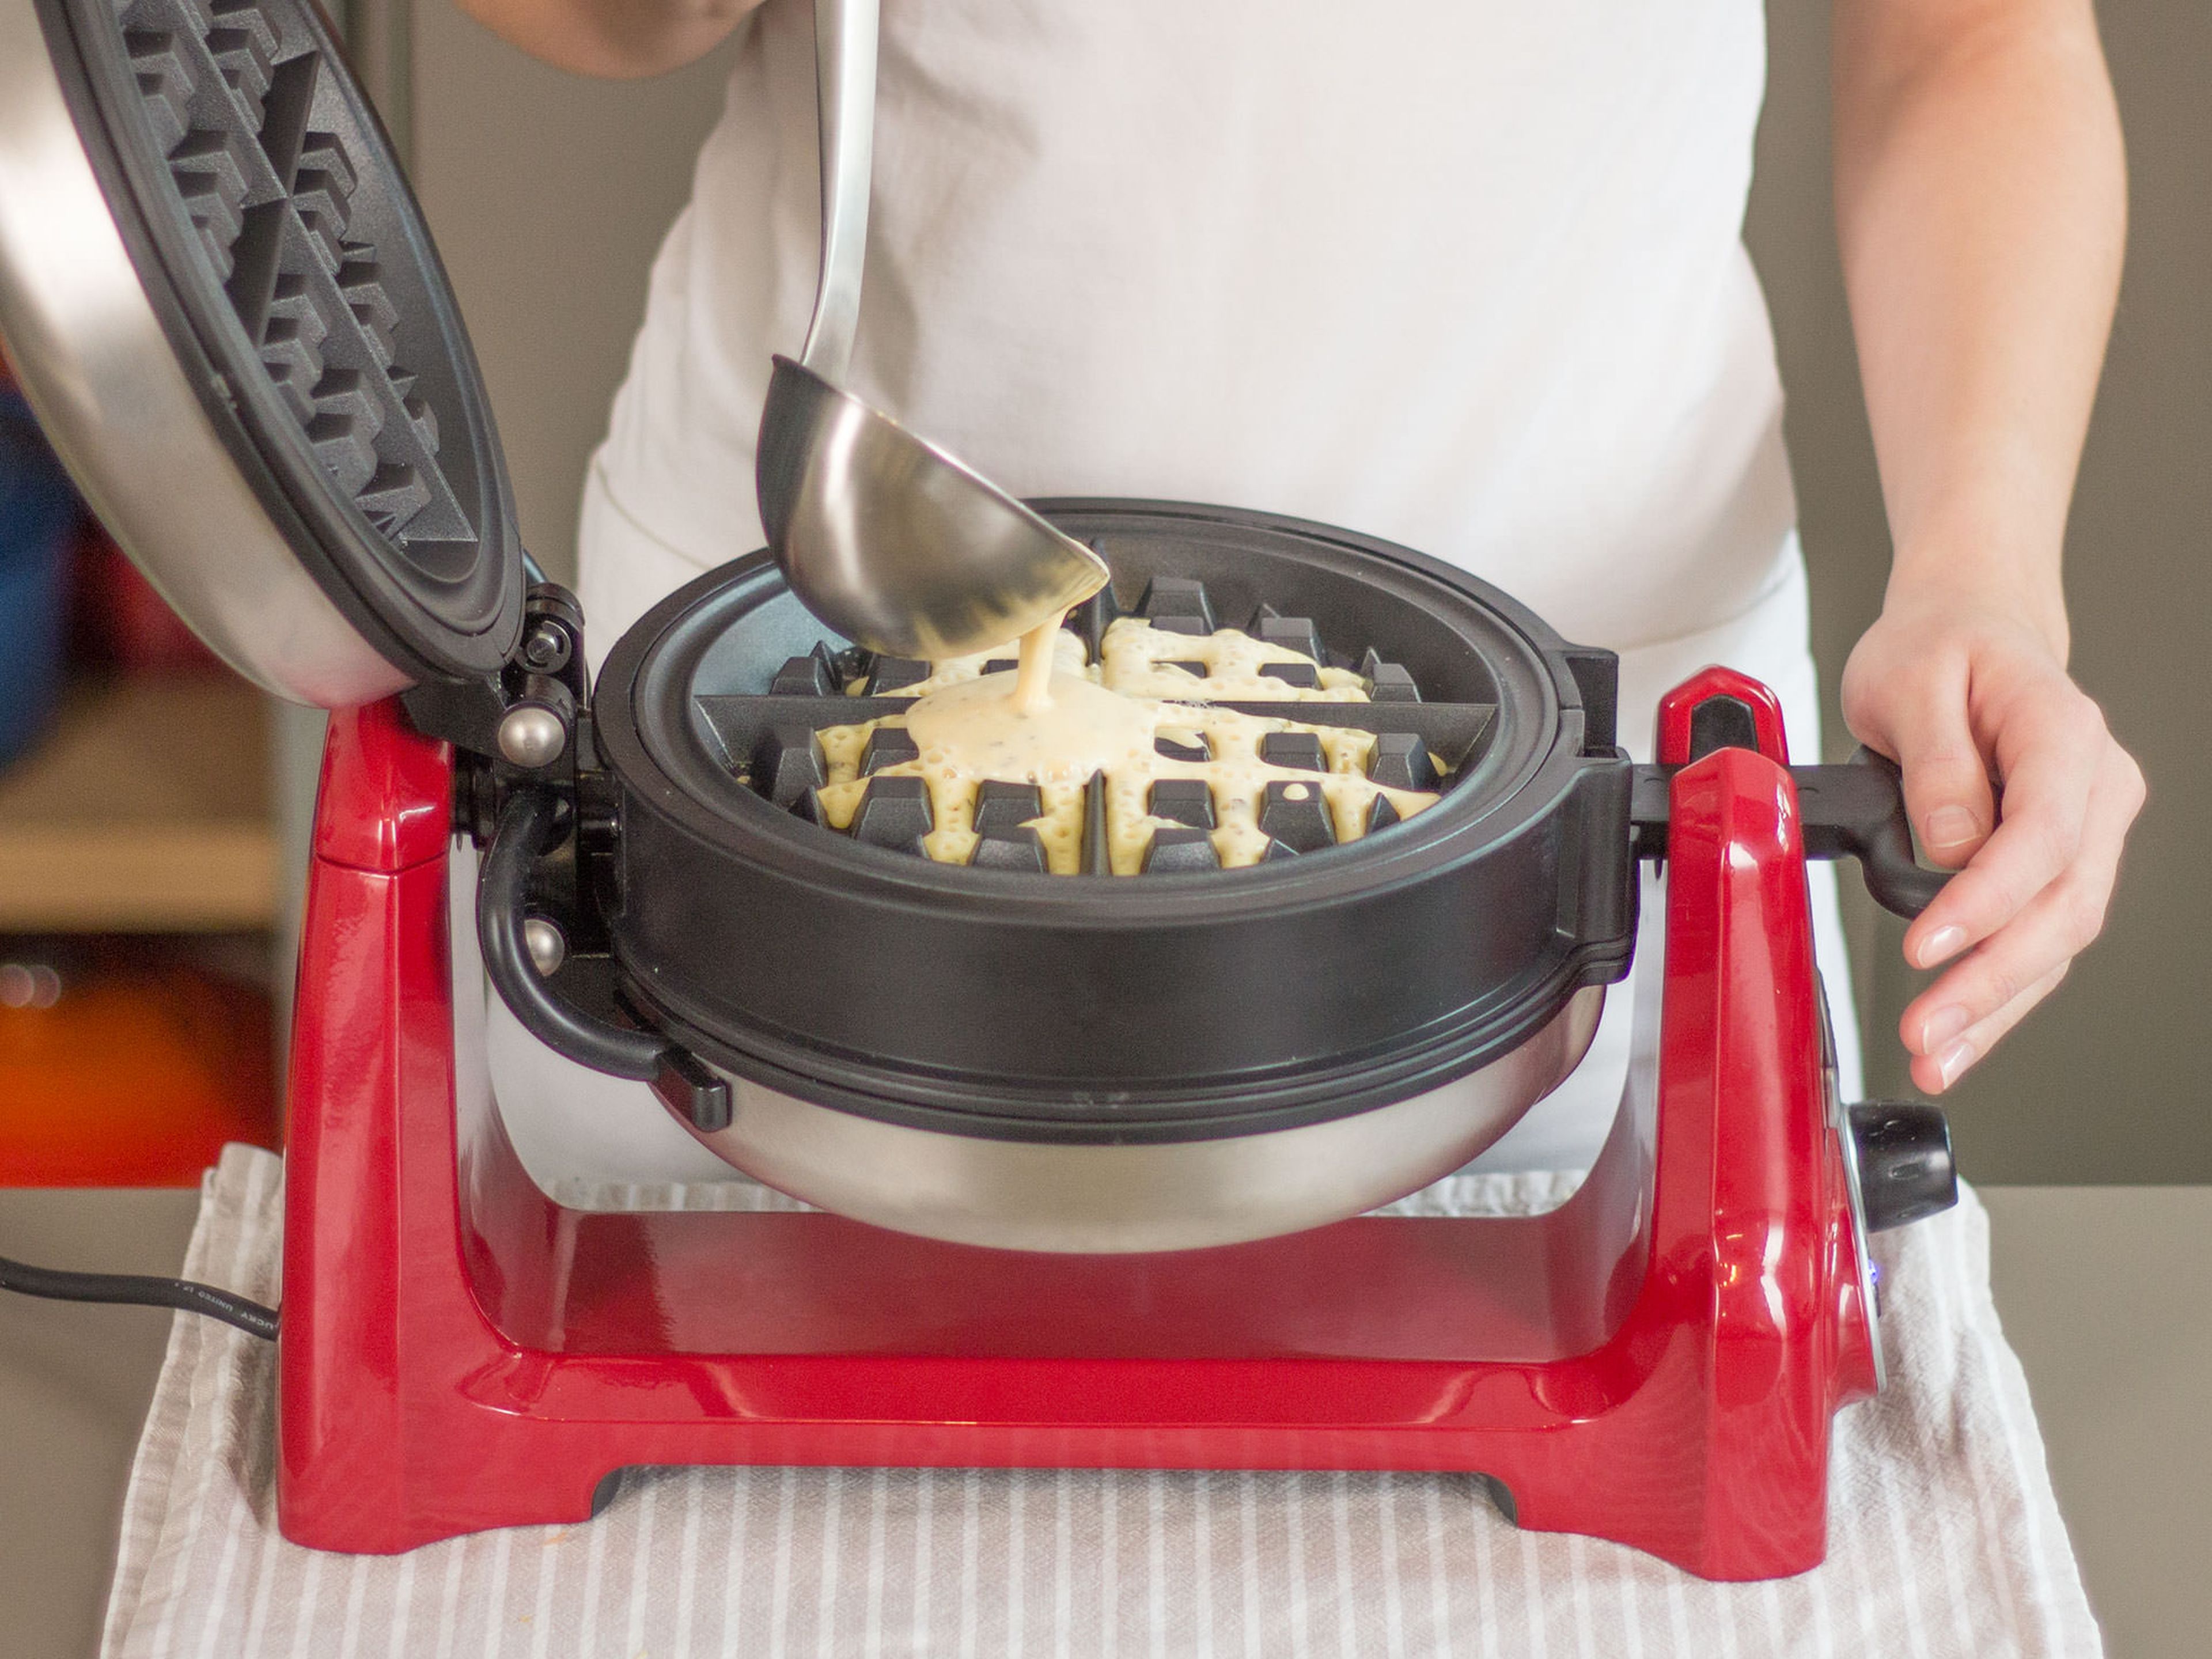 Preheat a waffle maker and grease with some butter. Pour some of the batter into waffle maker and cook for approx. 3 – 4 min. or until golden brown.